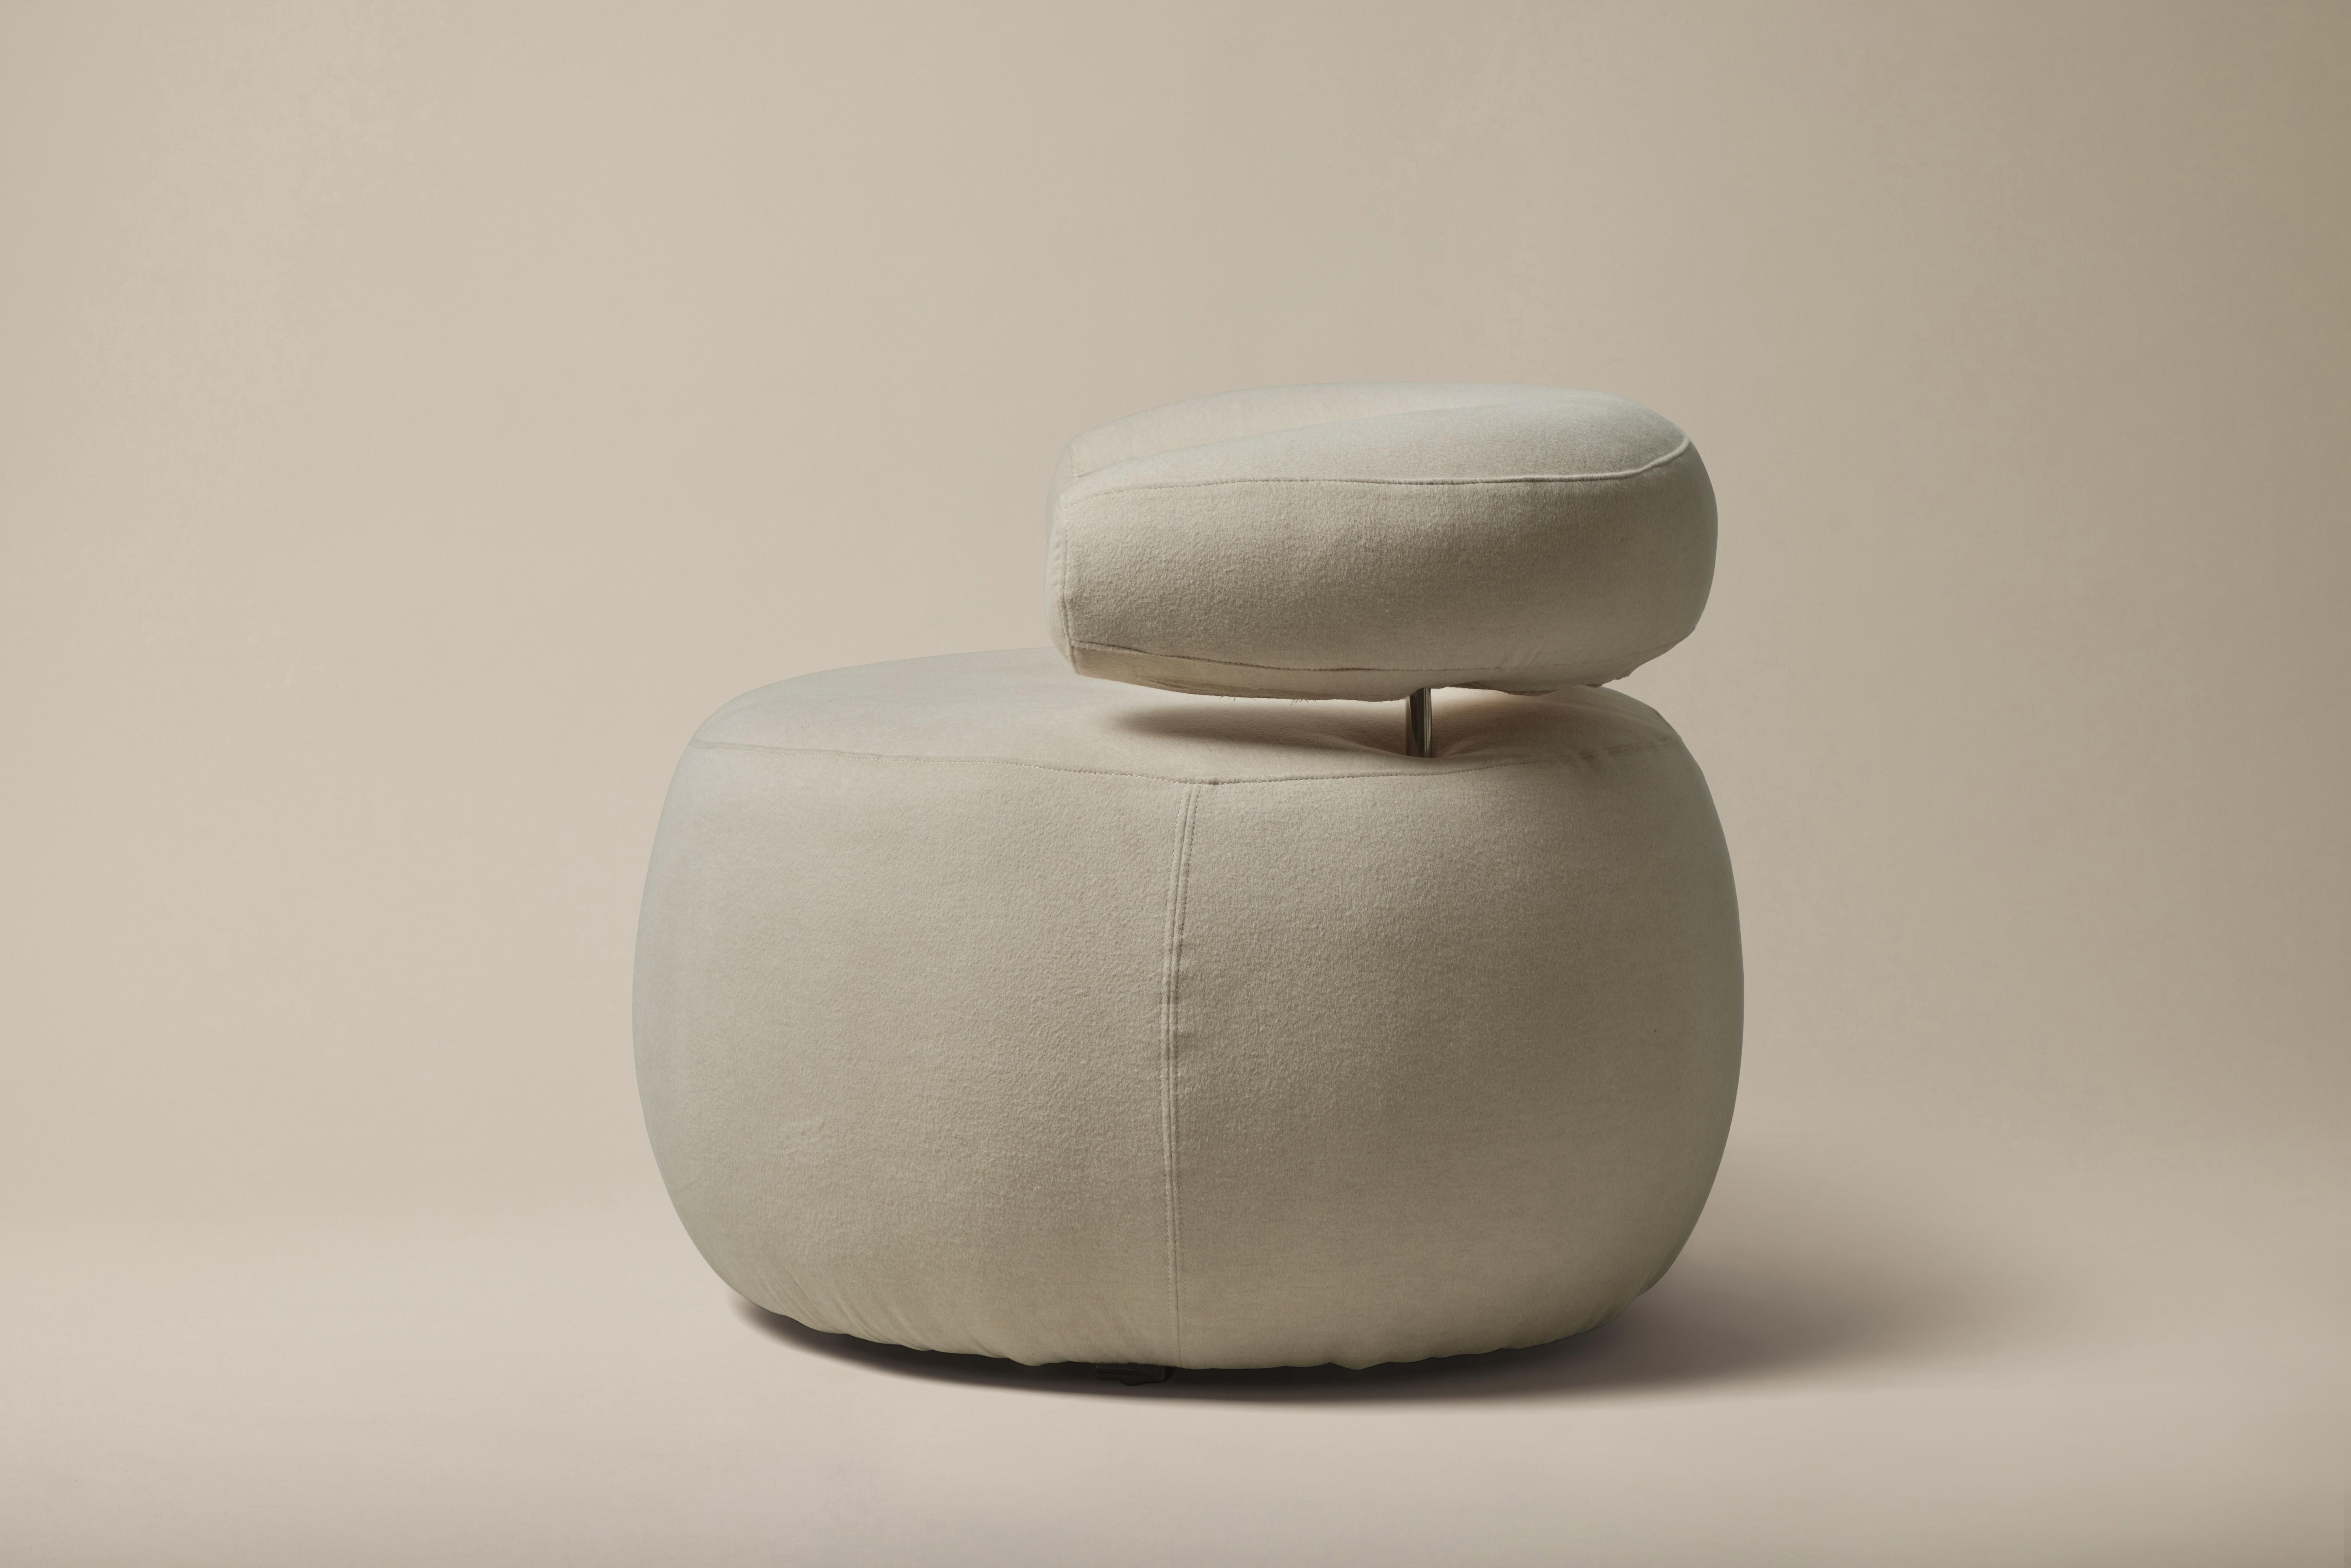 Late 20th Century Atrio Vintage Roche Bobois Style Pouf Lounge Chair in Cashmere, 1970s For Sale